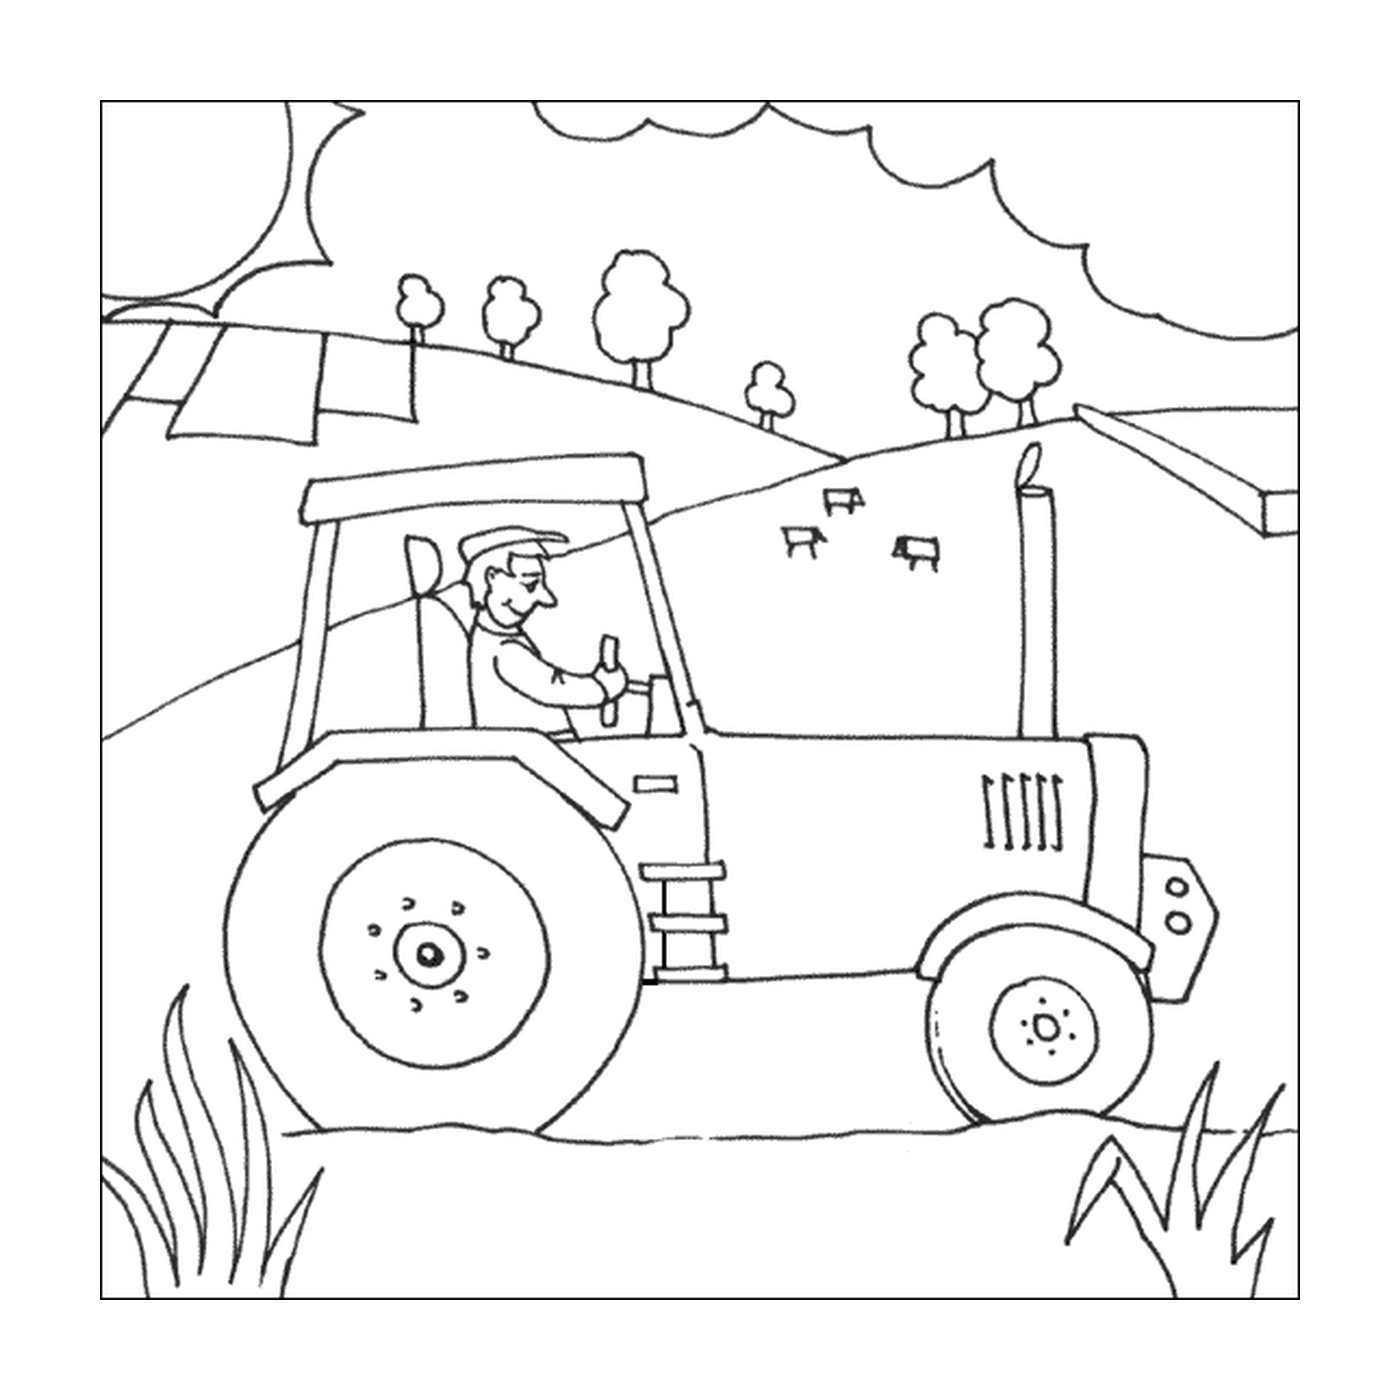  Man led small tractor 